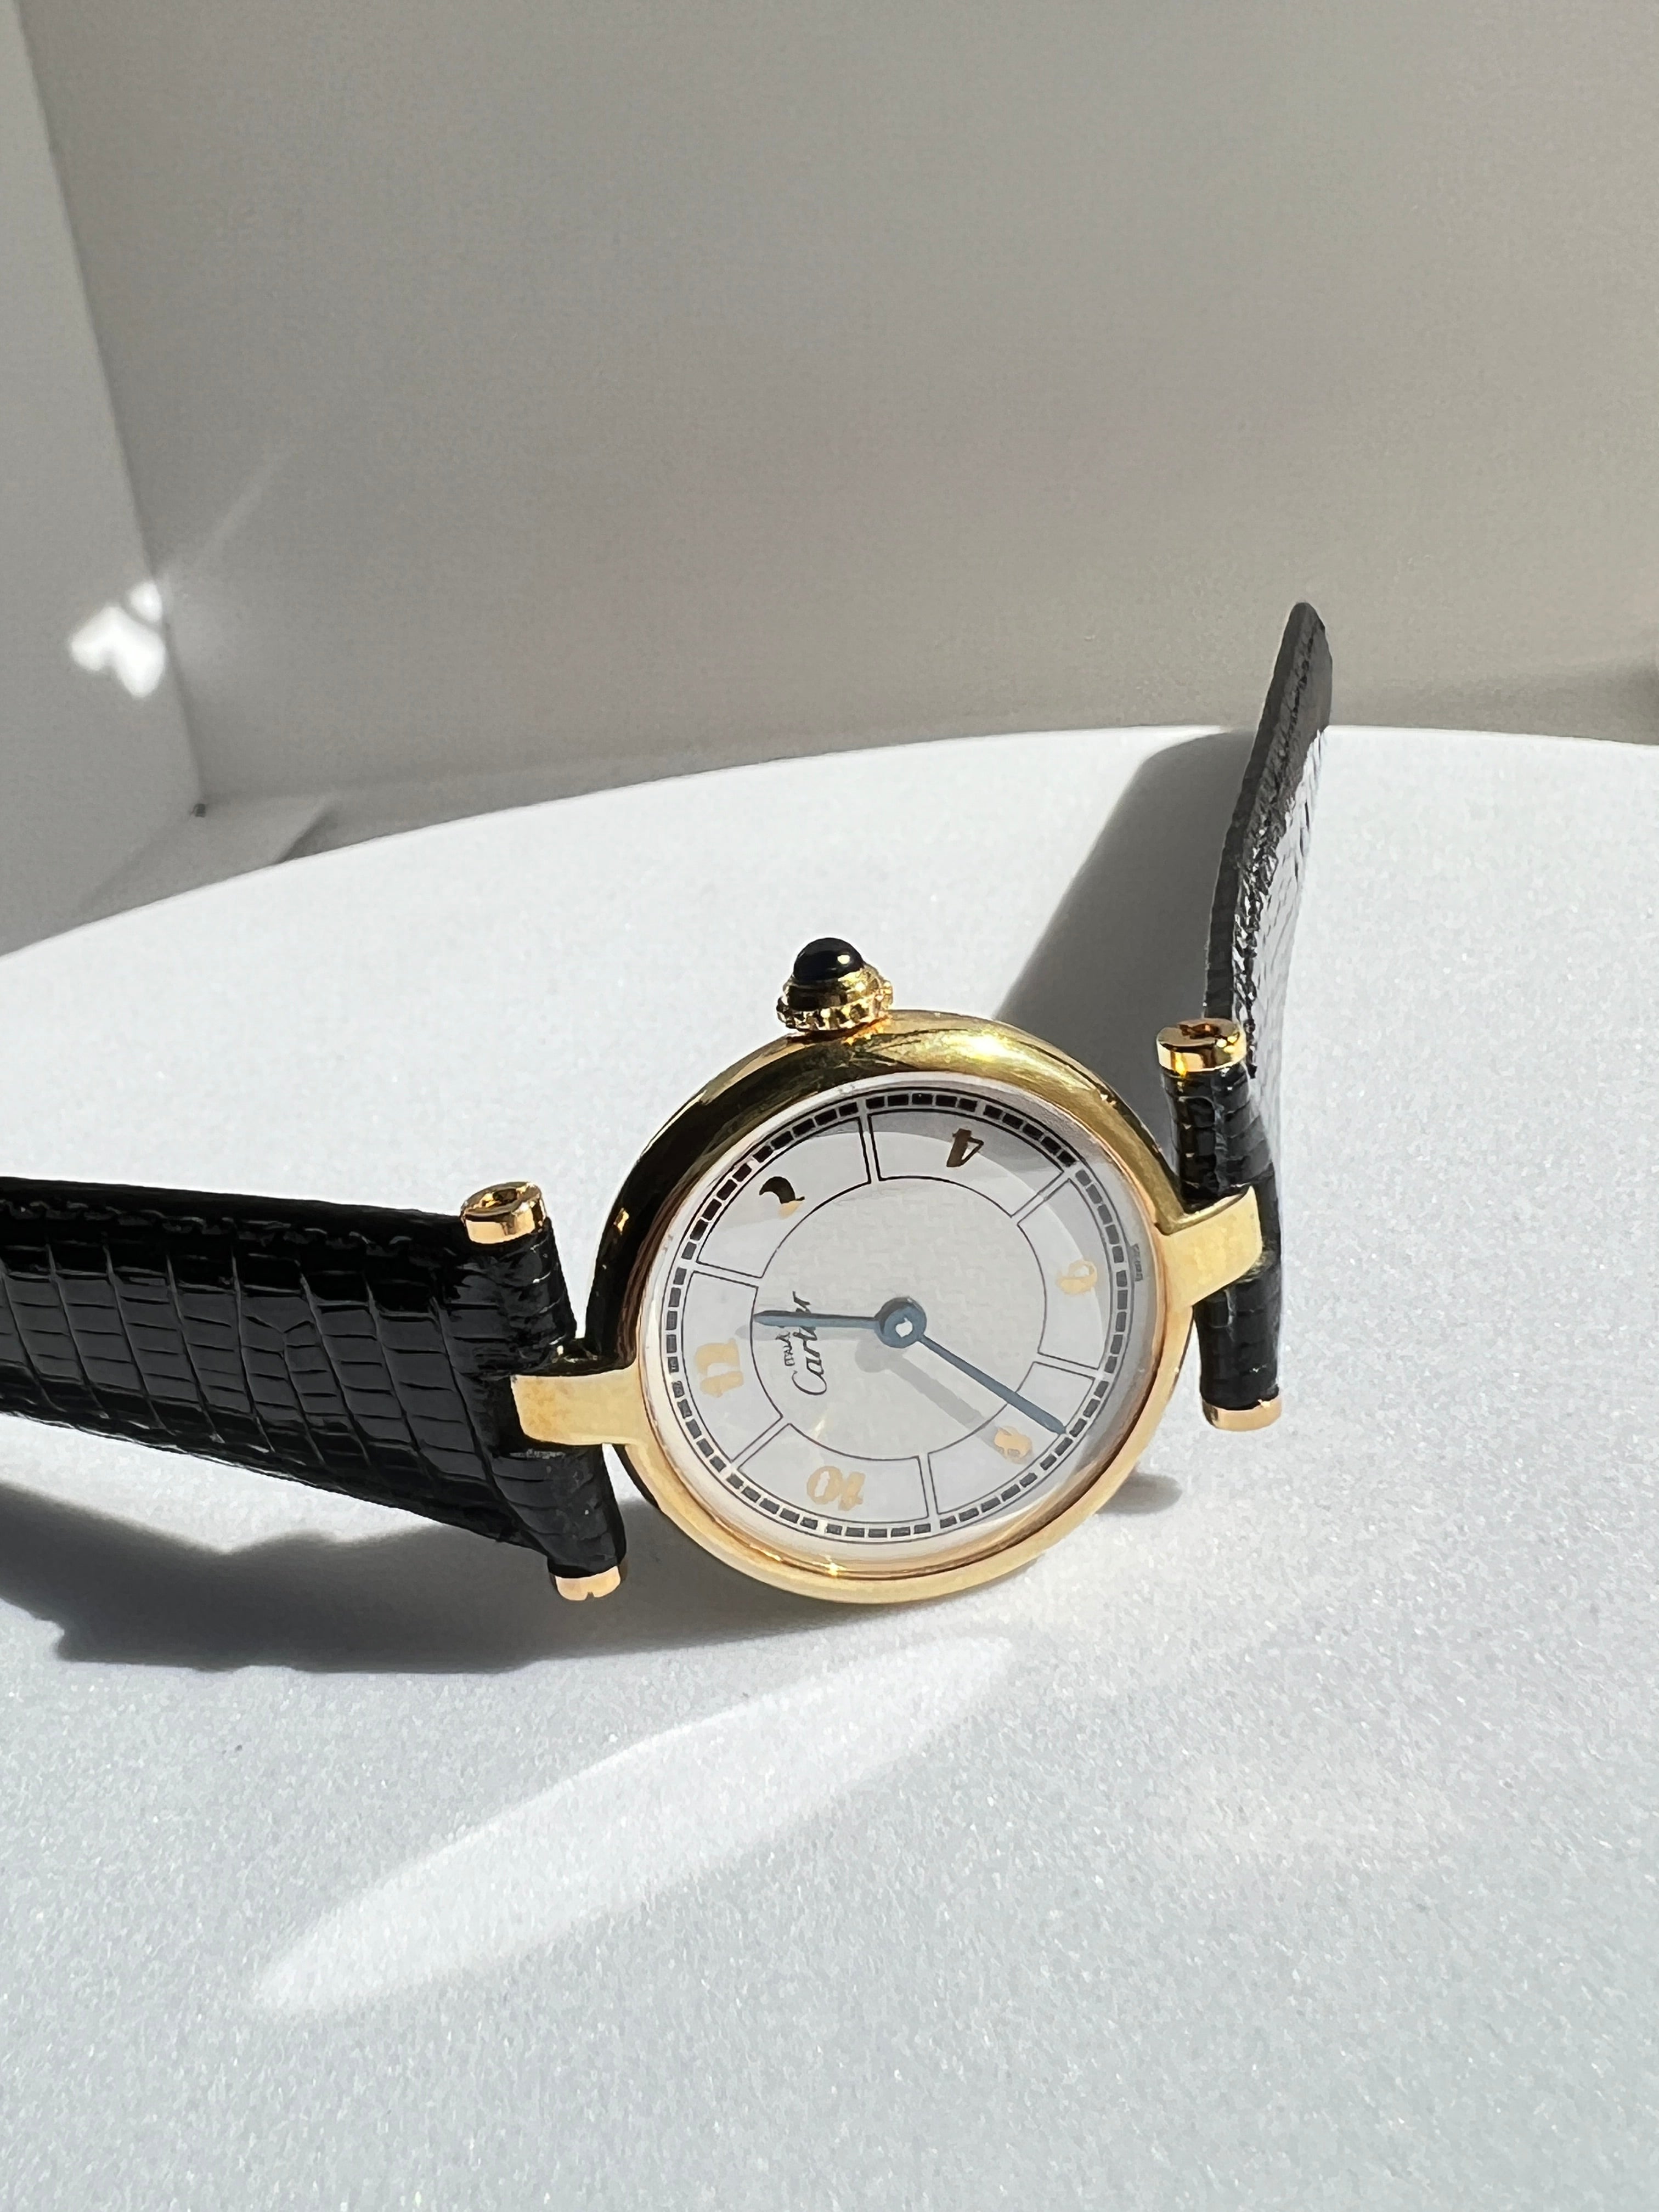 Cartier watch Vendome with Arabic numerals, small and medium size, sterling silver with vermeil